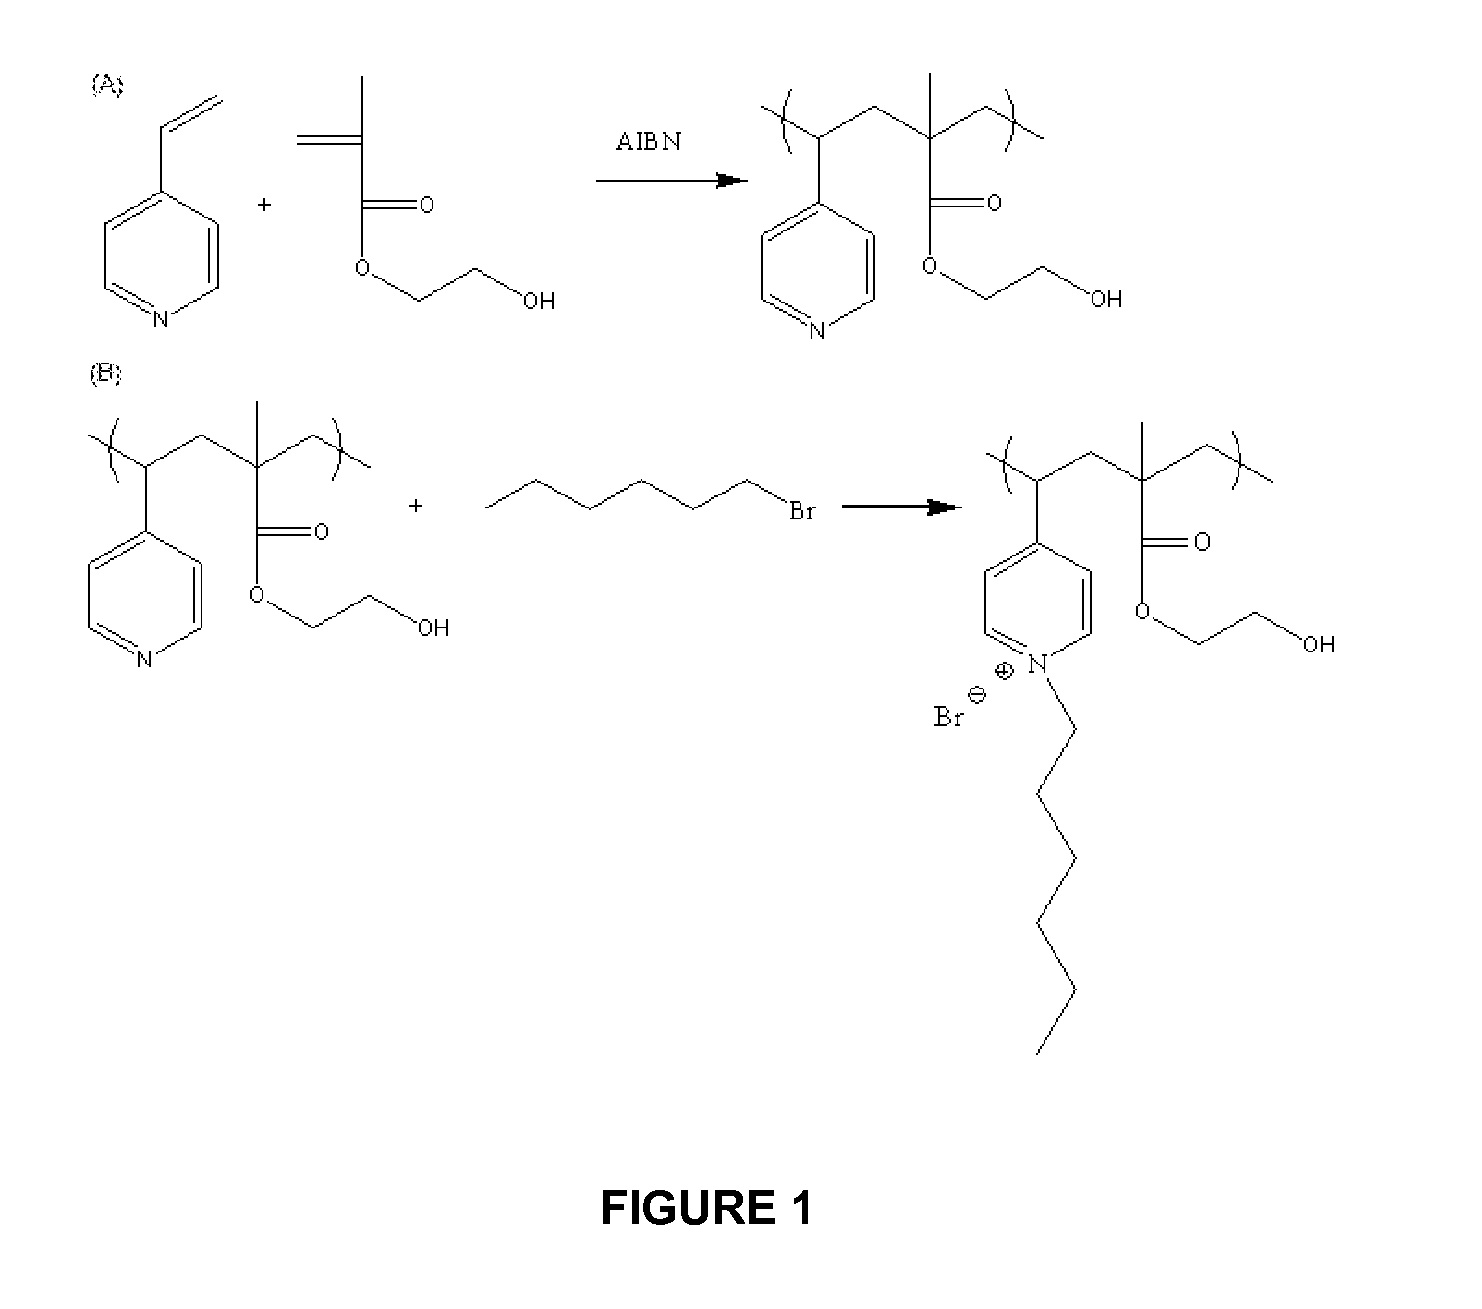 Hydrophilized antimicrobial polymers